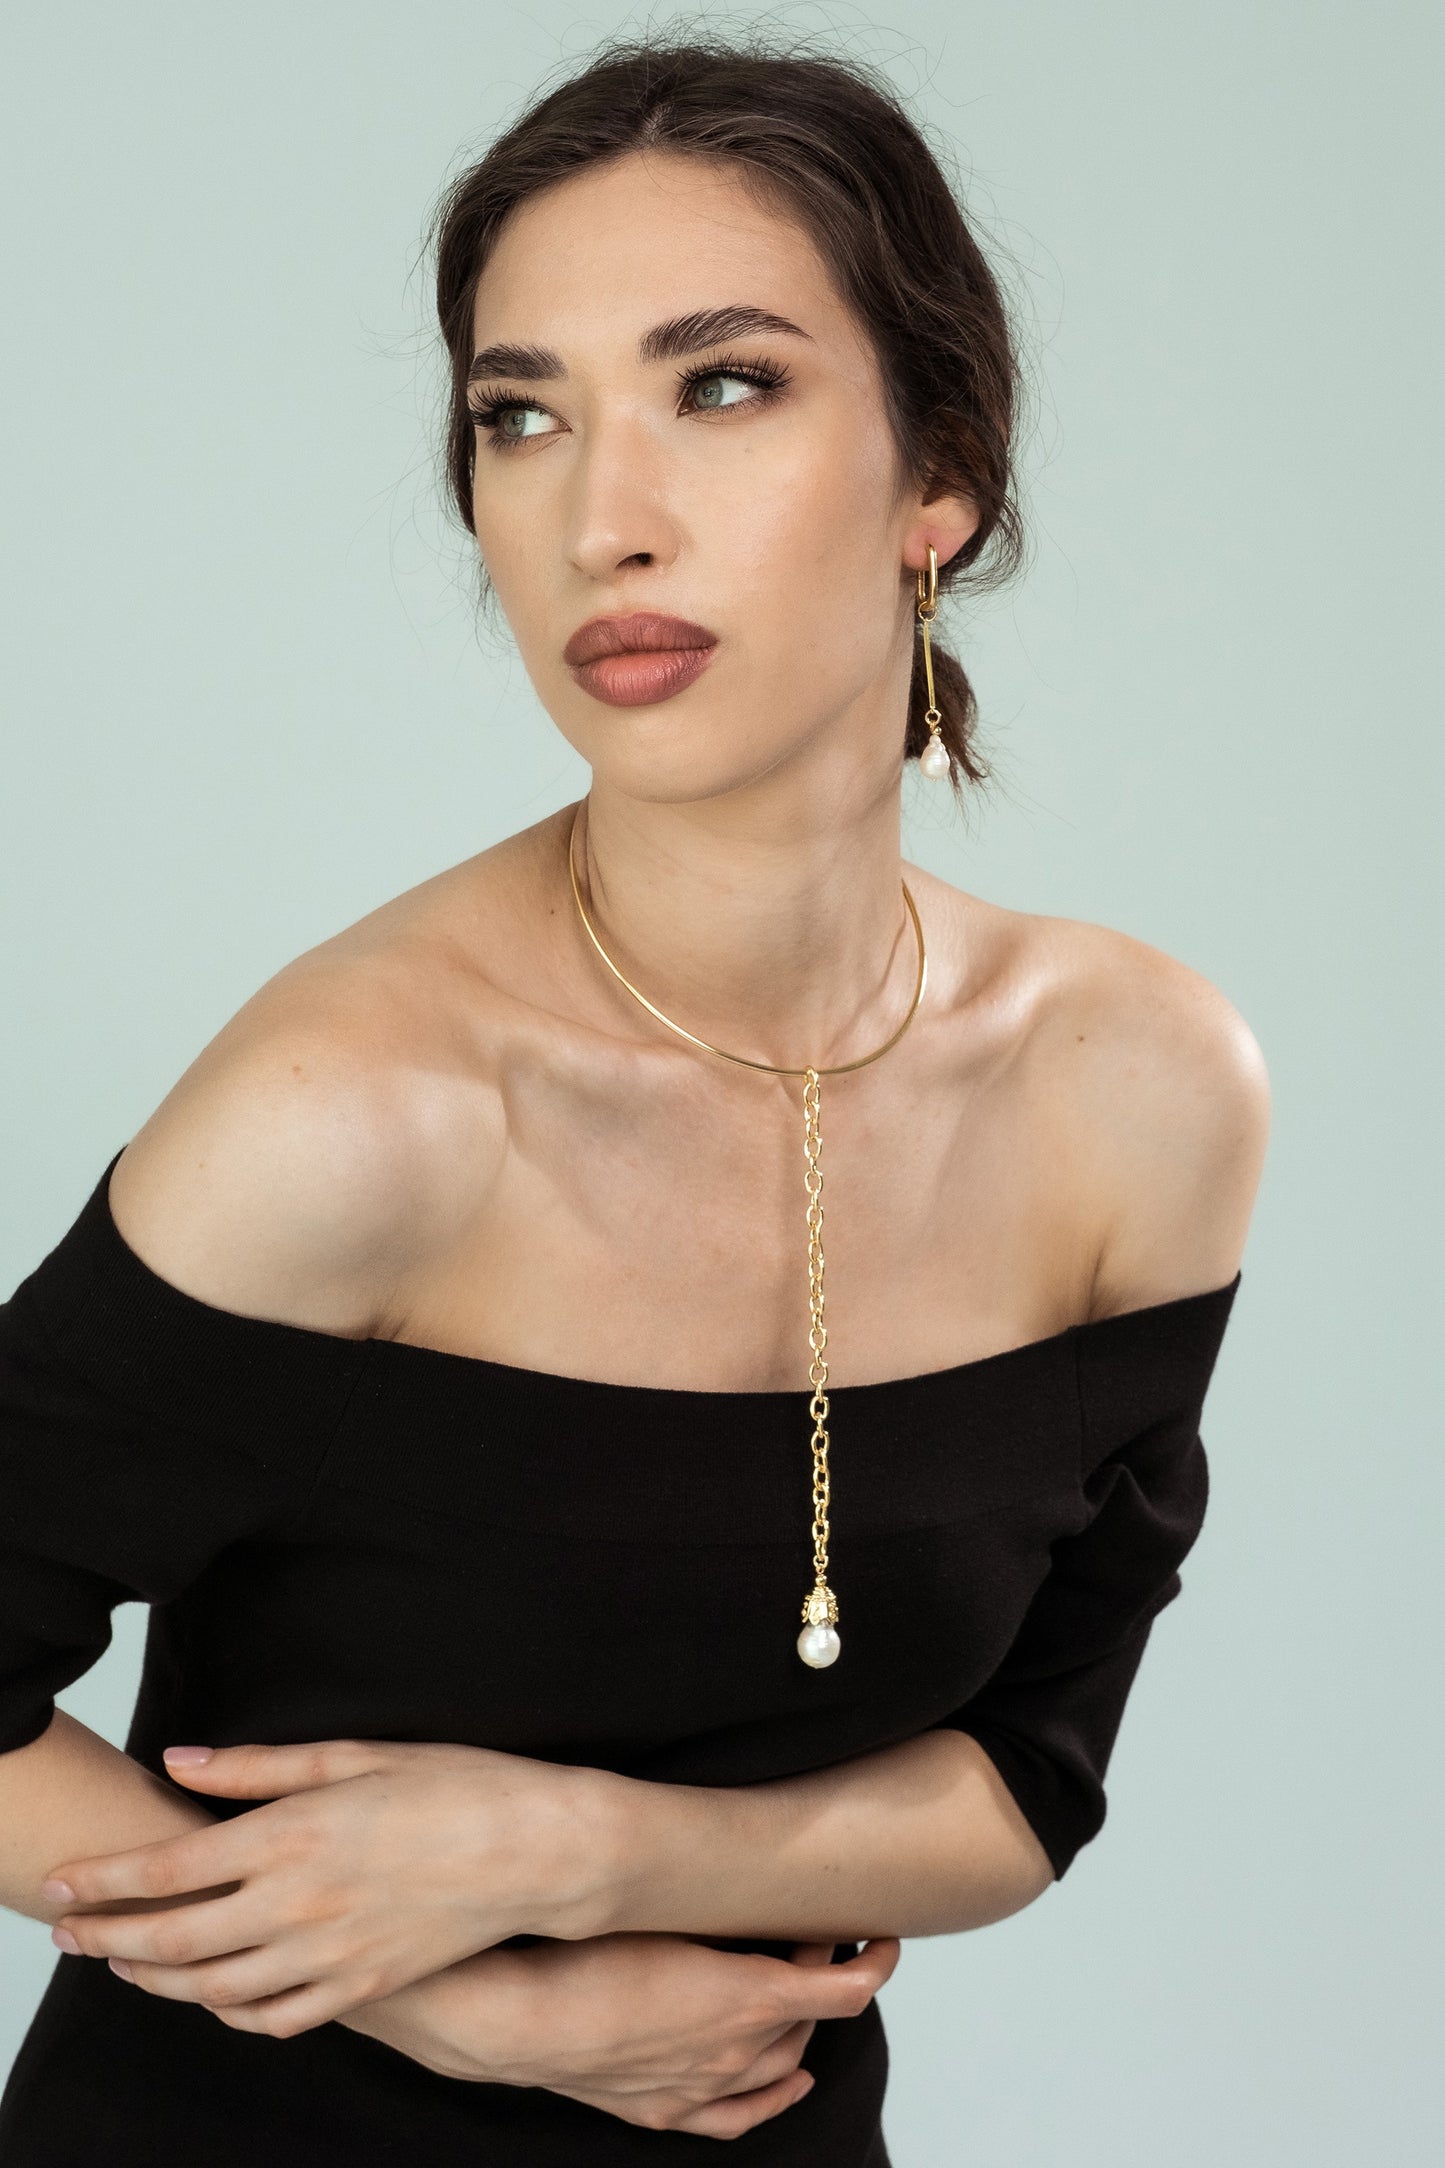 Women Gold-Plated Y-Necklace, Choker with Long Chain and Simulated Ivory Pearl Pendant, Bohemian Style Trendy & Adjustable Elegant Fashion Jewelry